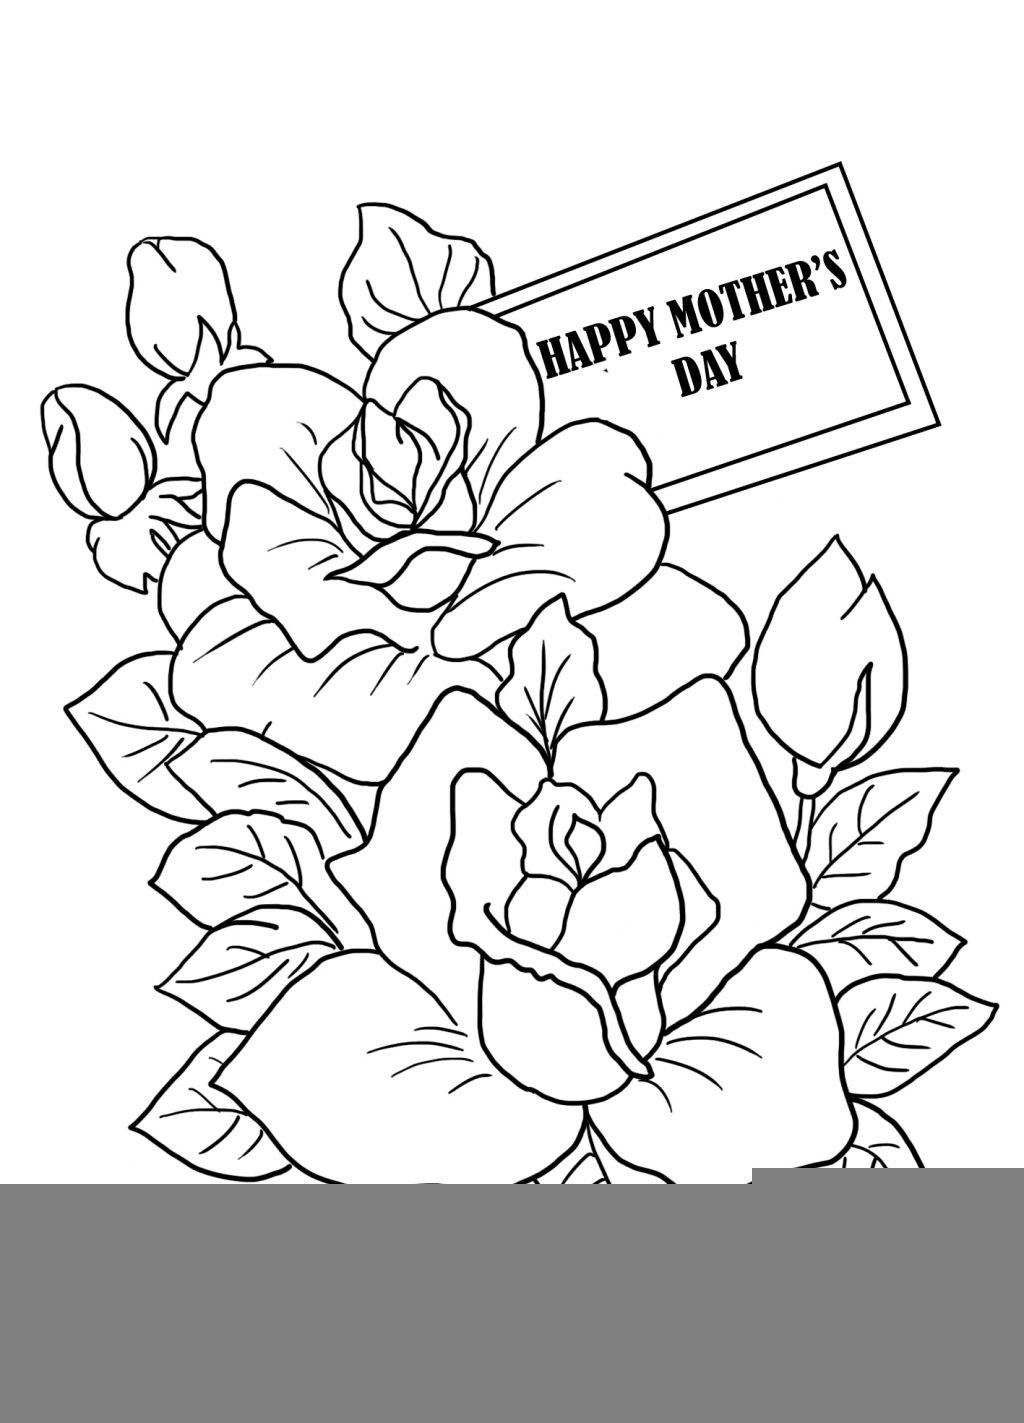 Free Mother's Day Coloring Pages Mothers Day Coloring Page Cards Page Coloring Page Free Coloring